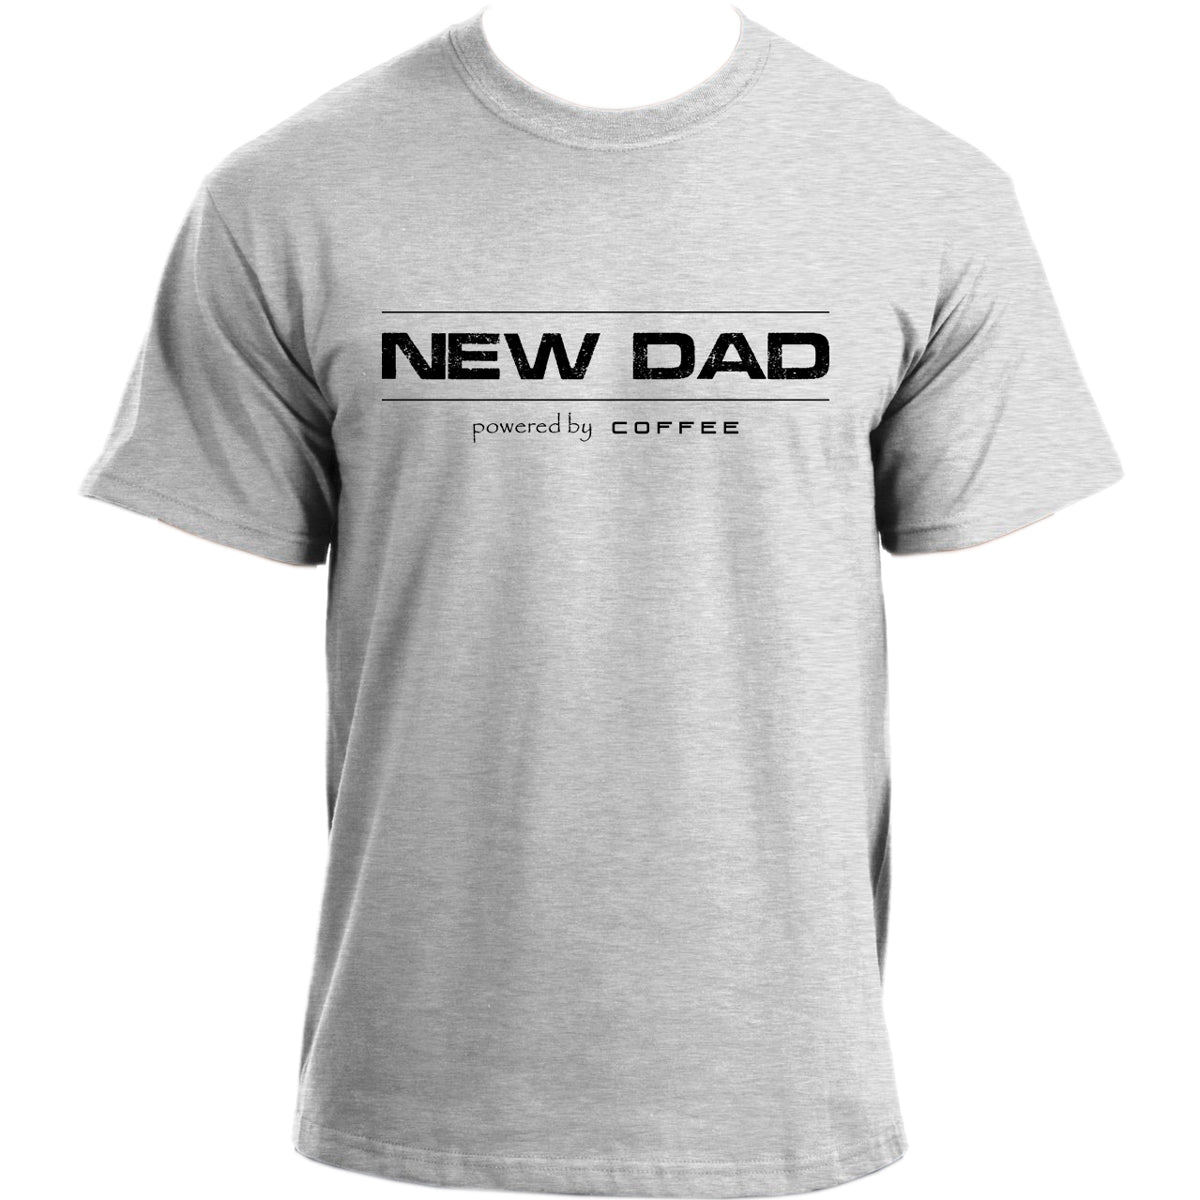 New Dad Powered by Coffee T-Shirt I New Daddy Powered by Caffeine I Funny Dad Shirt